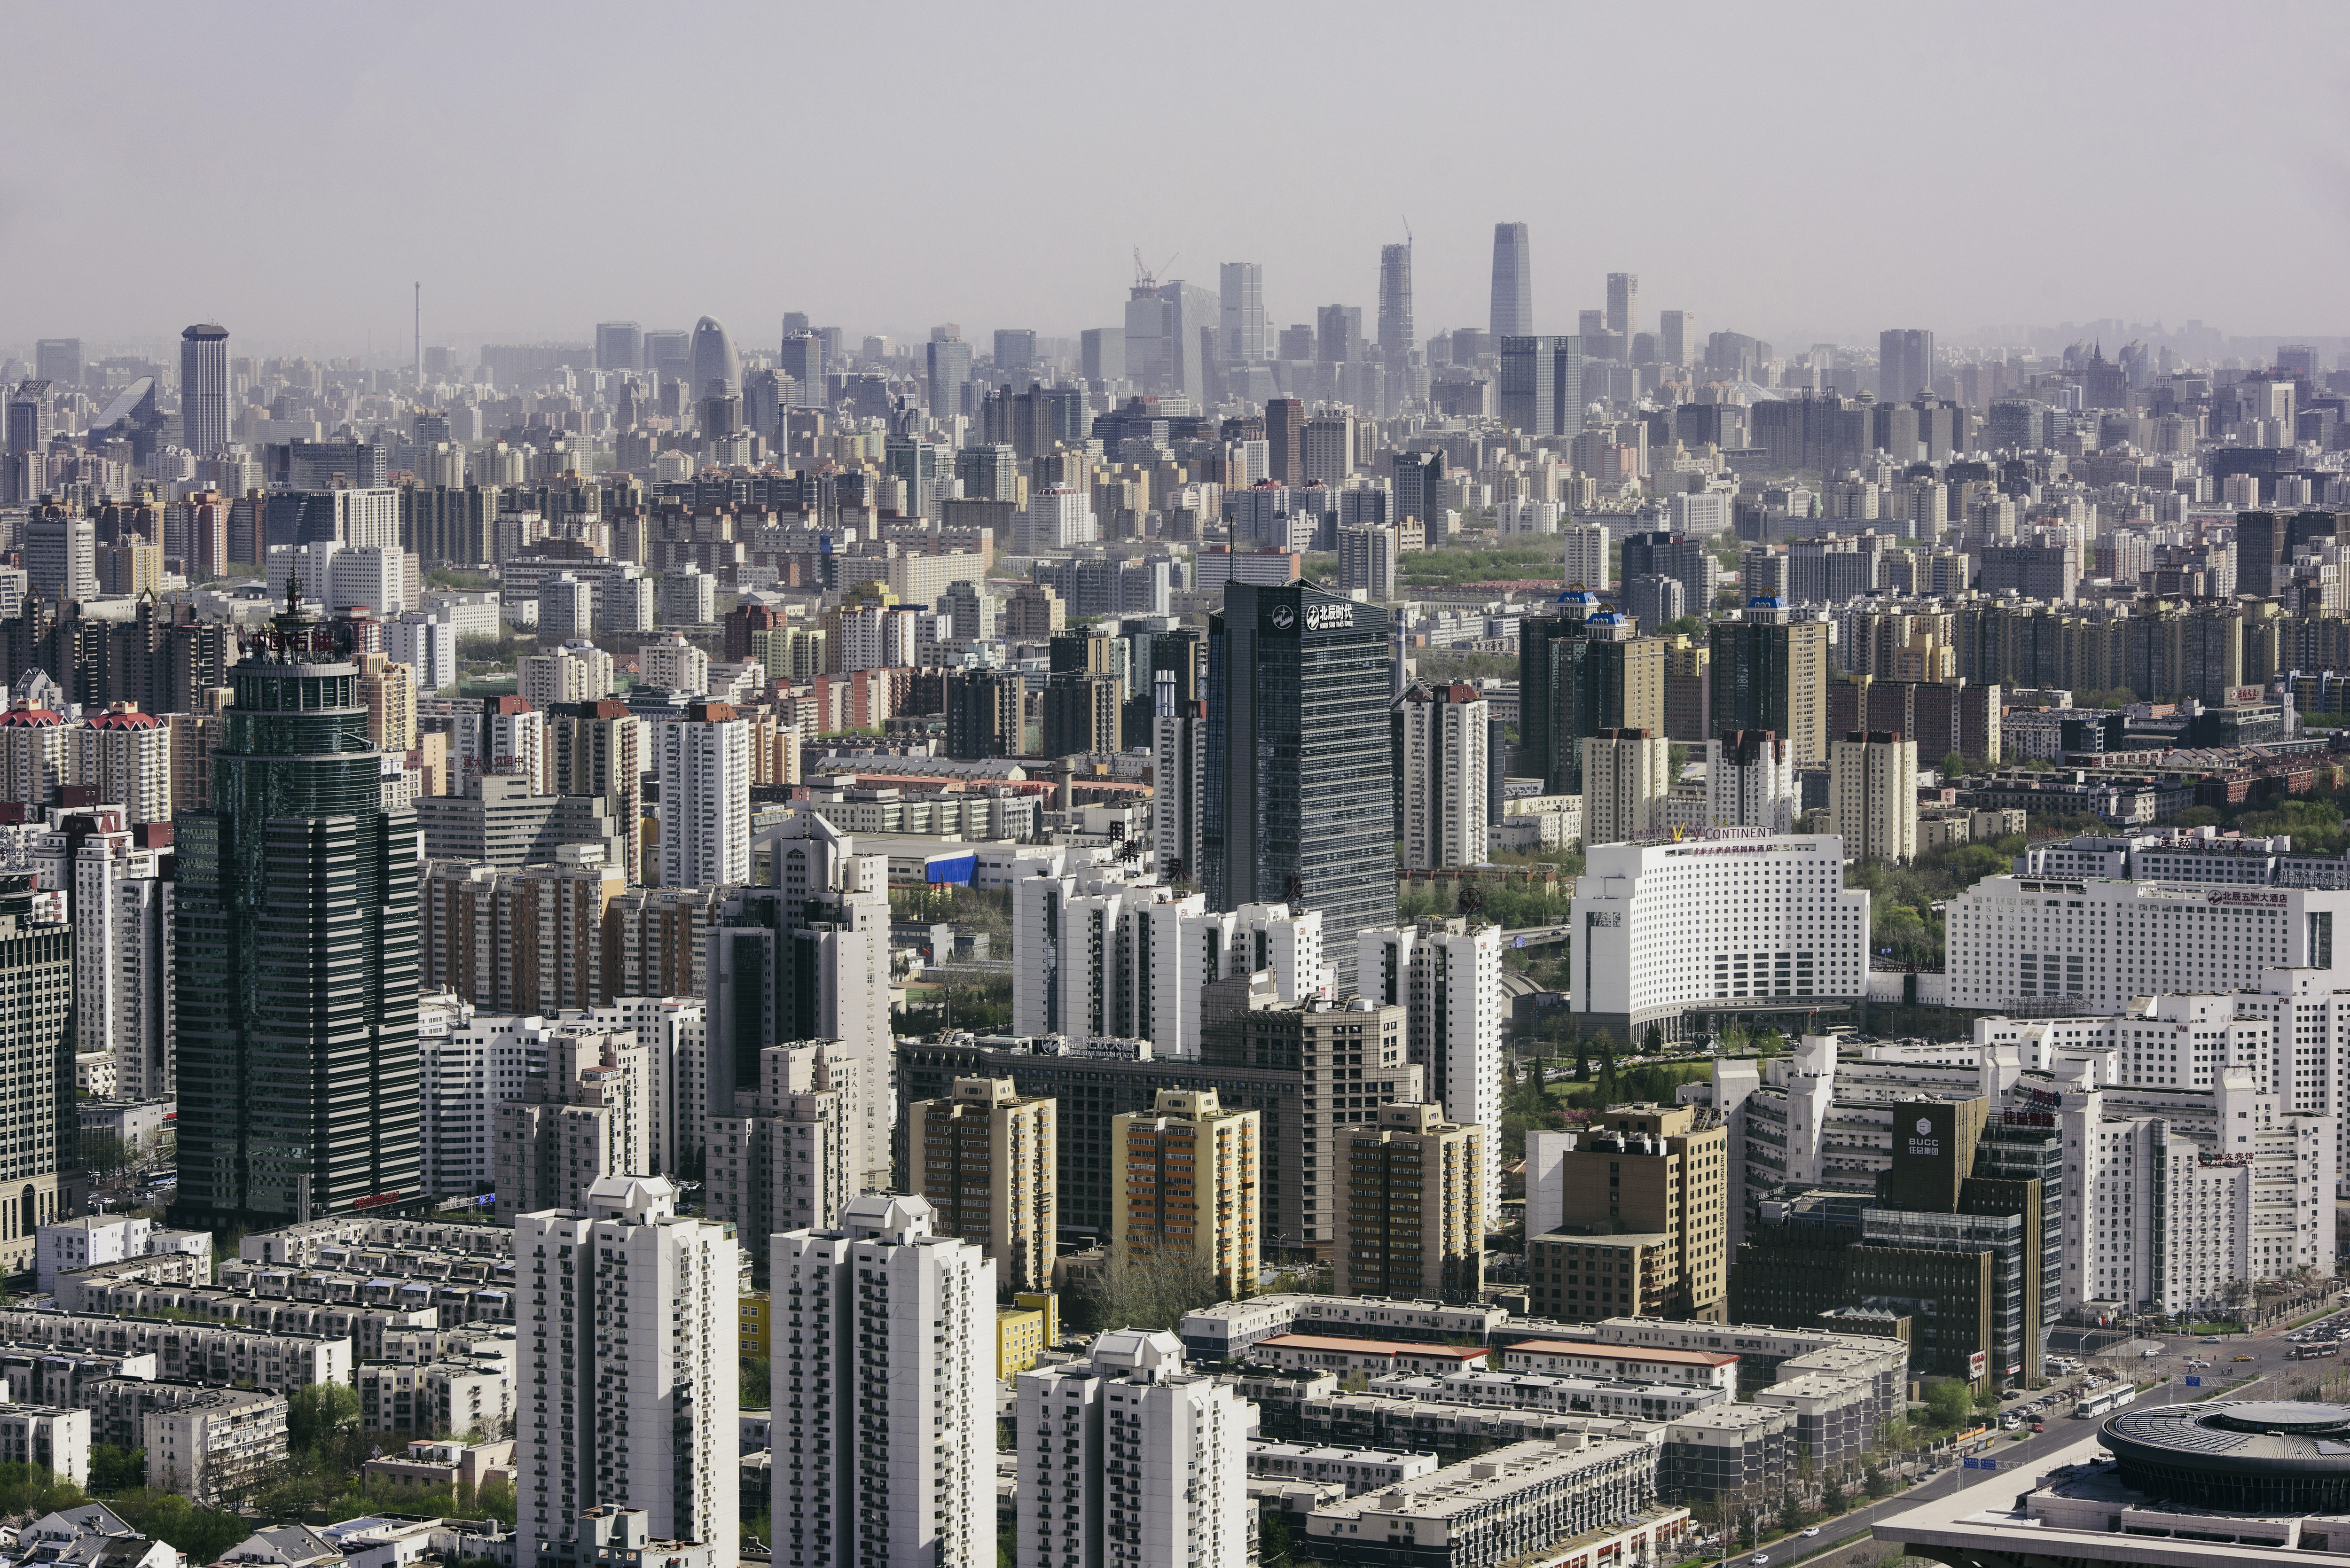 Beijing city government plans to release more land sites for sale, a move that sparked worries of a glut. Photo: Shutterstock